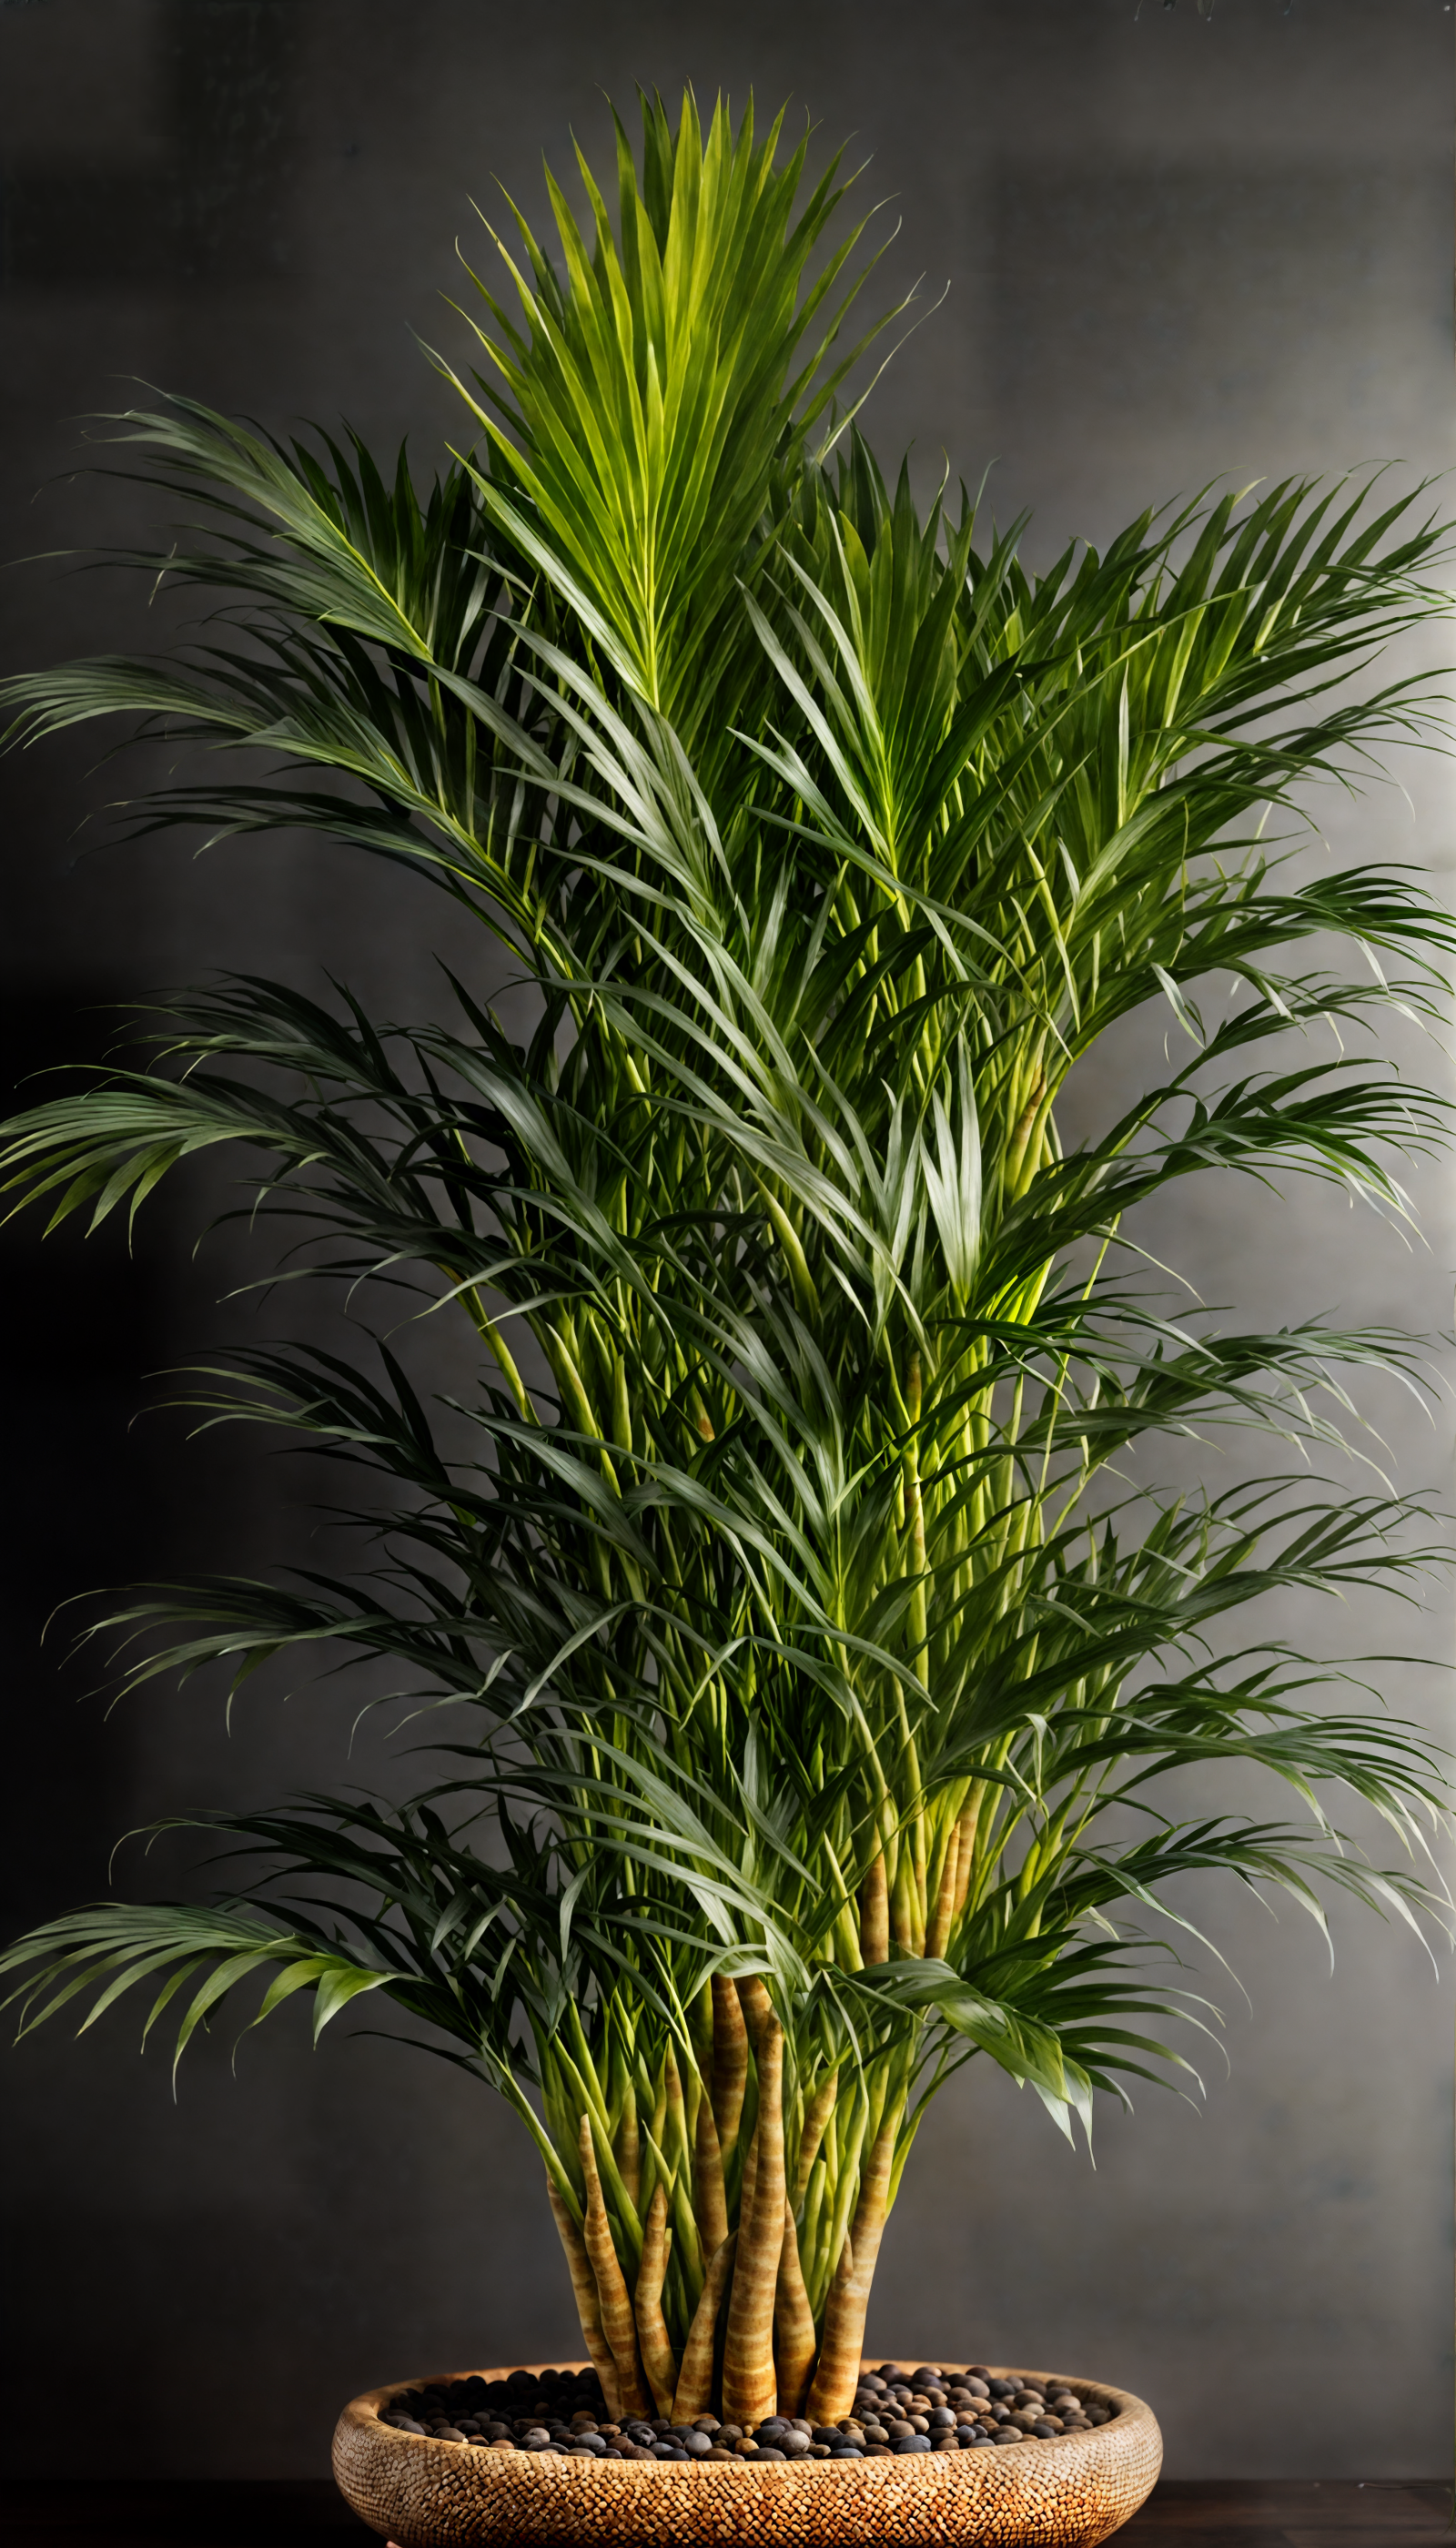 Dypsis lutescens (Areca palm) in a brown planter against a dark background, with clear, realistic lighting.